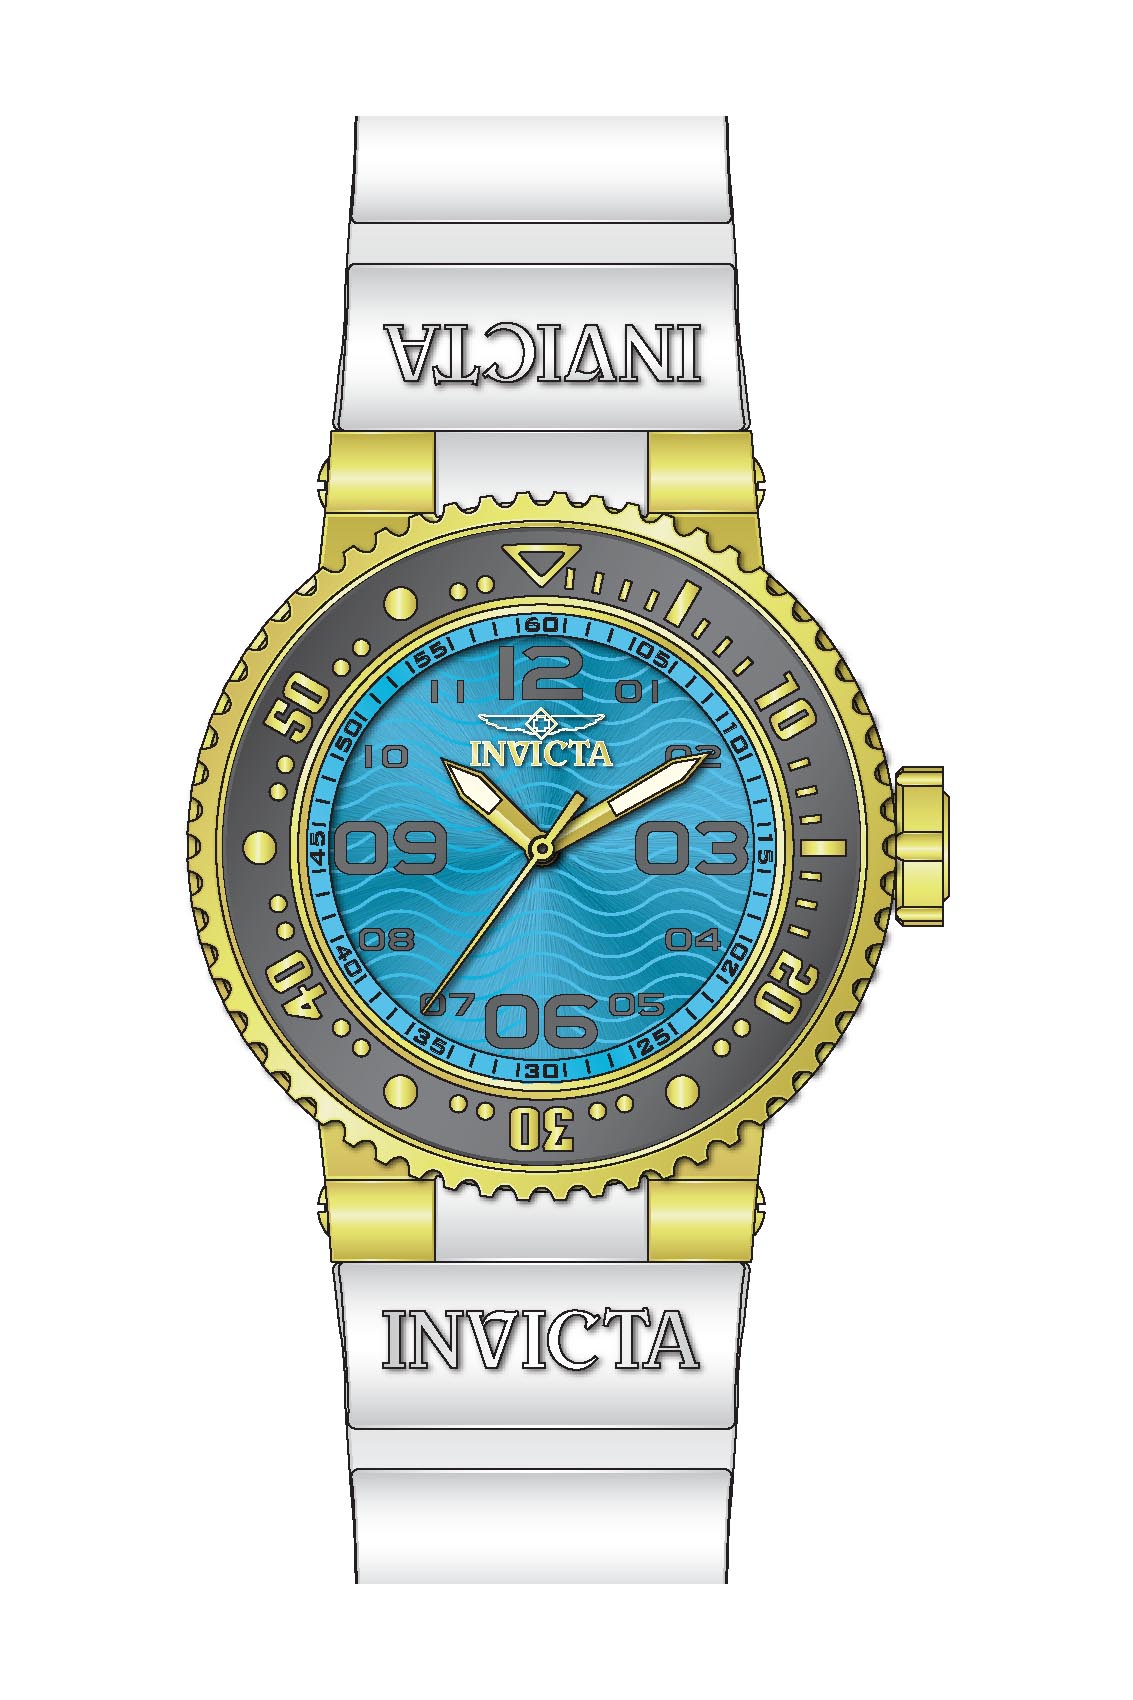 Mona Lisa Indgang temperament Band for Invicta Pro Diver Ocean Voyage Lady 37343 - Invicta Watch Bands